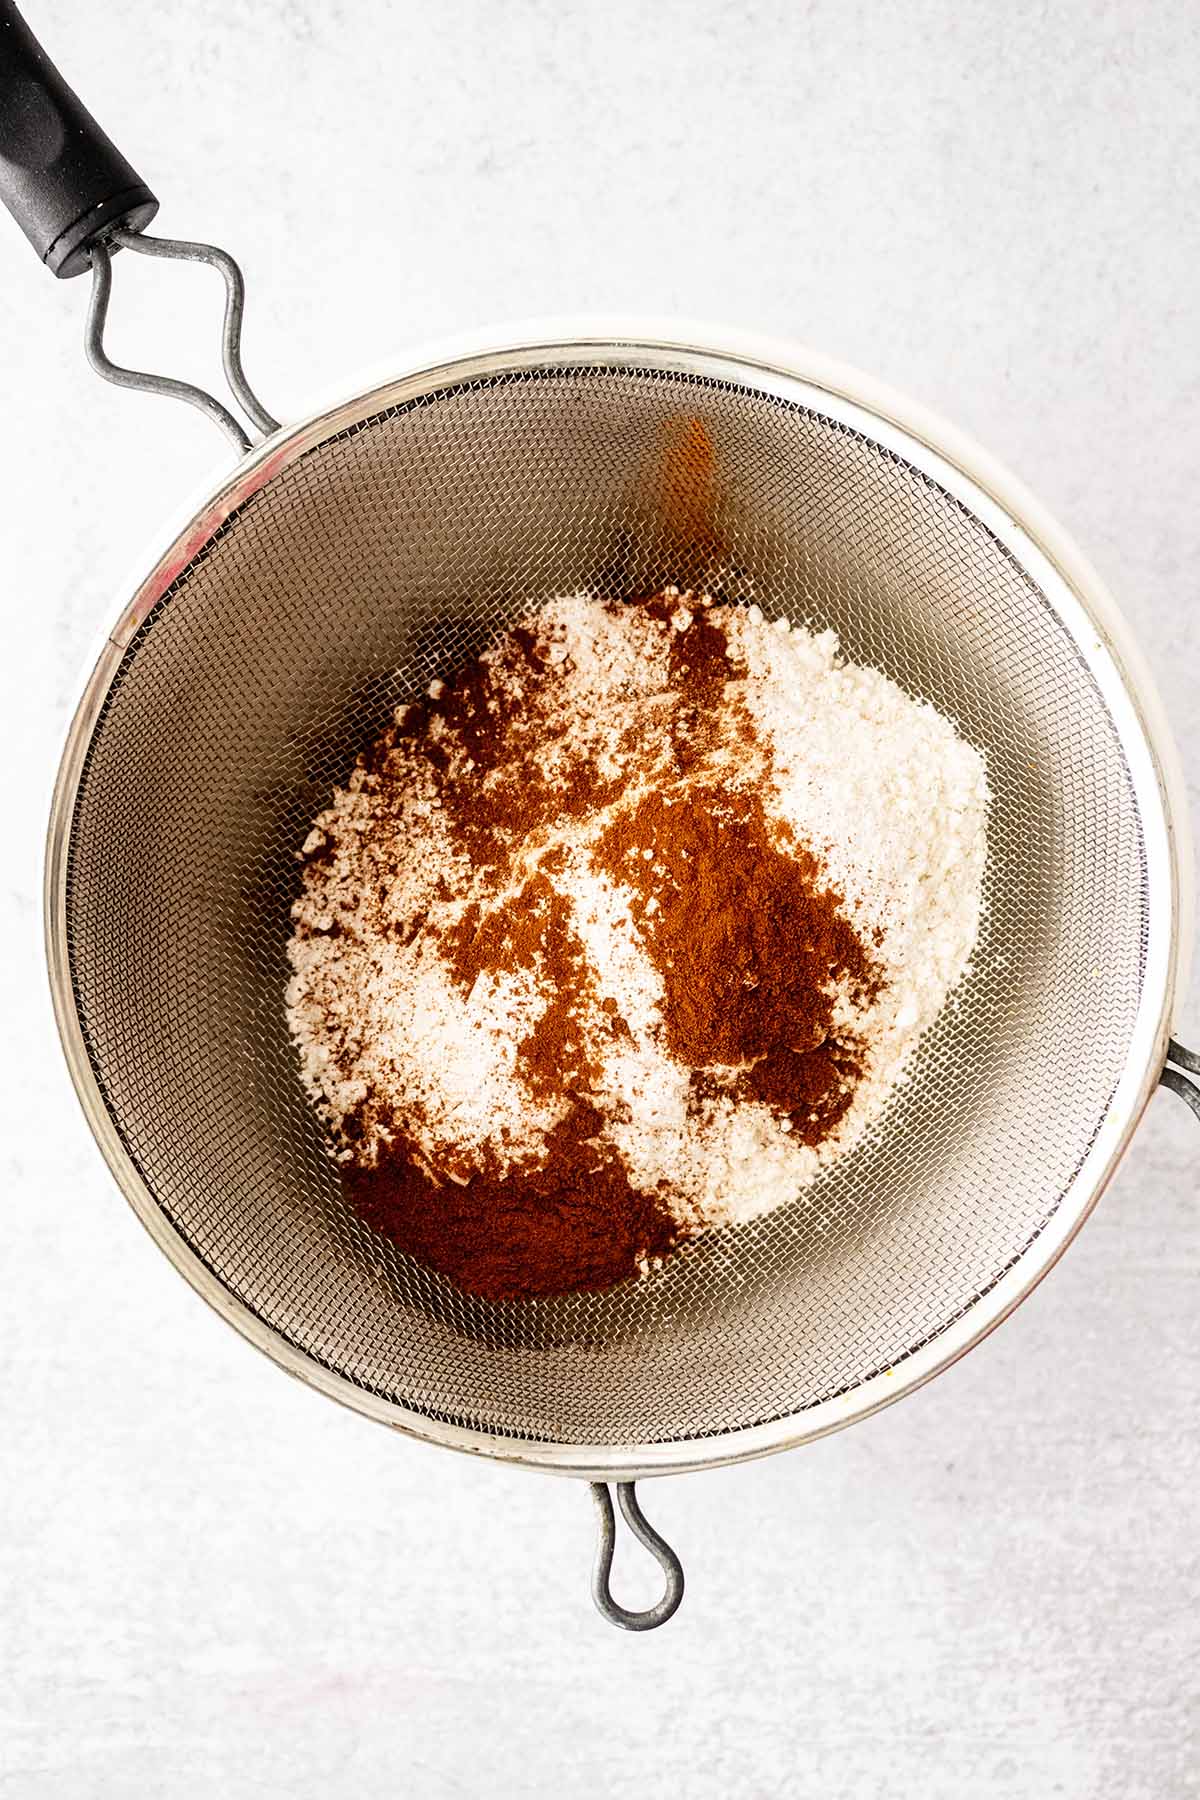 Dry ingredients in a mesh strainer on top of a white ceramic bowl.